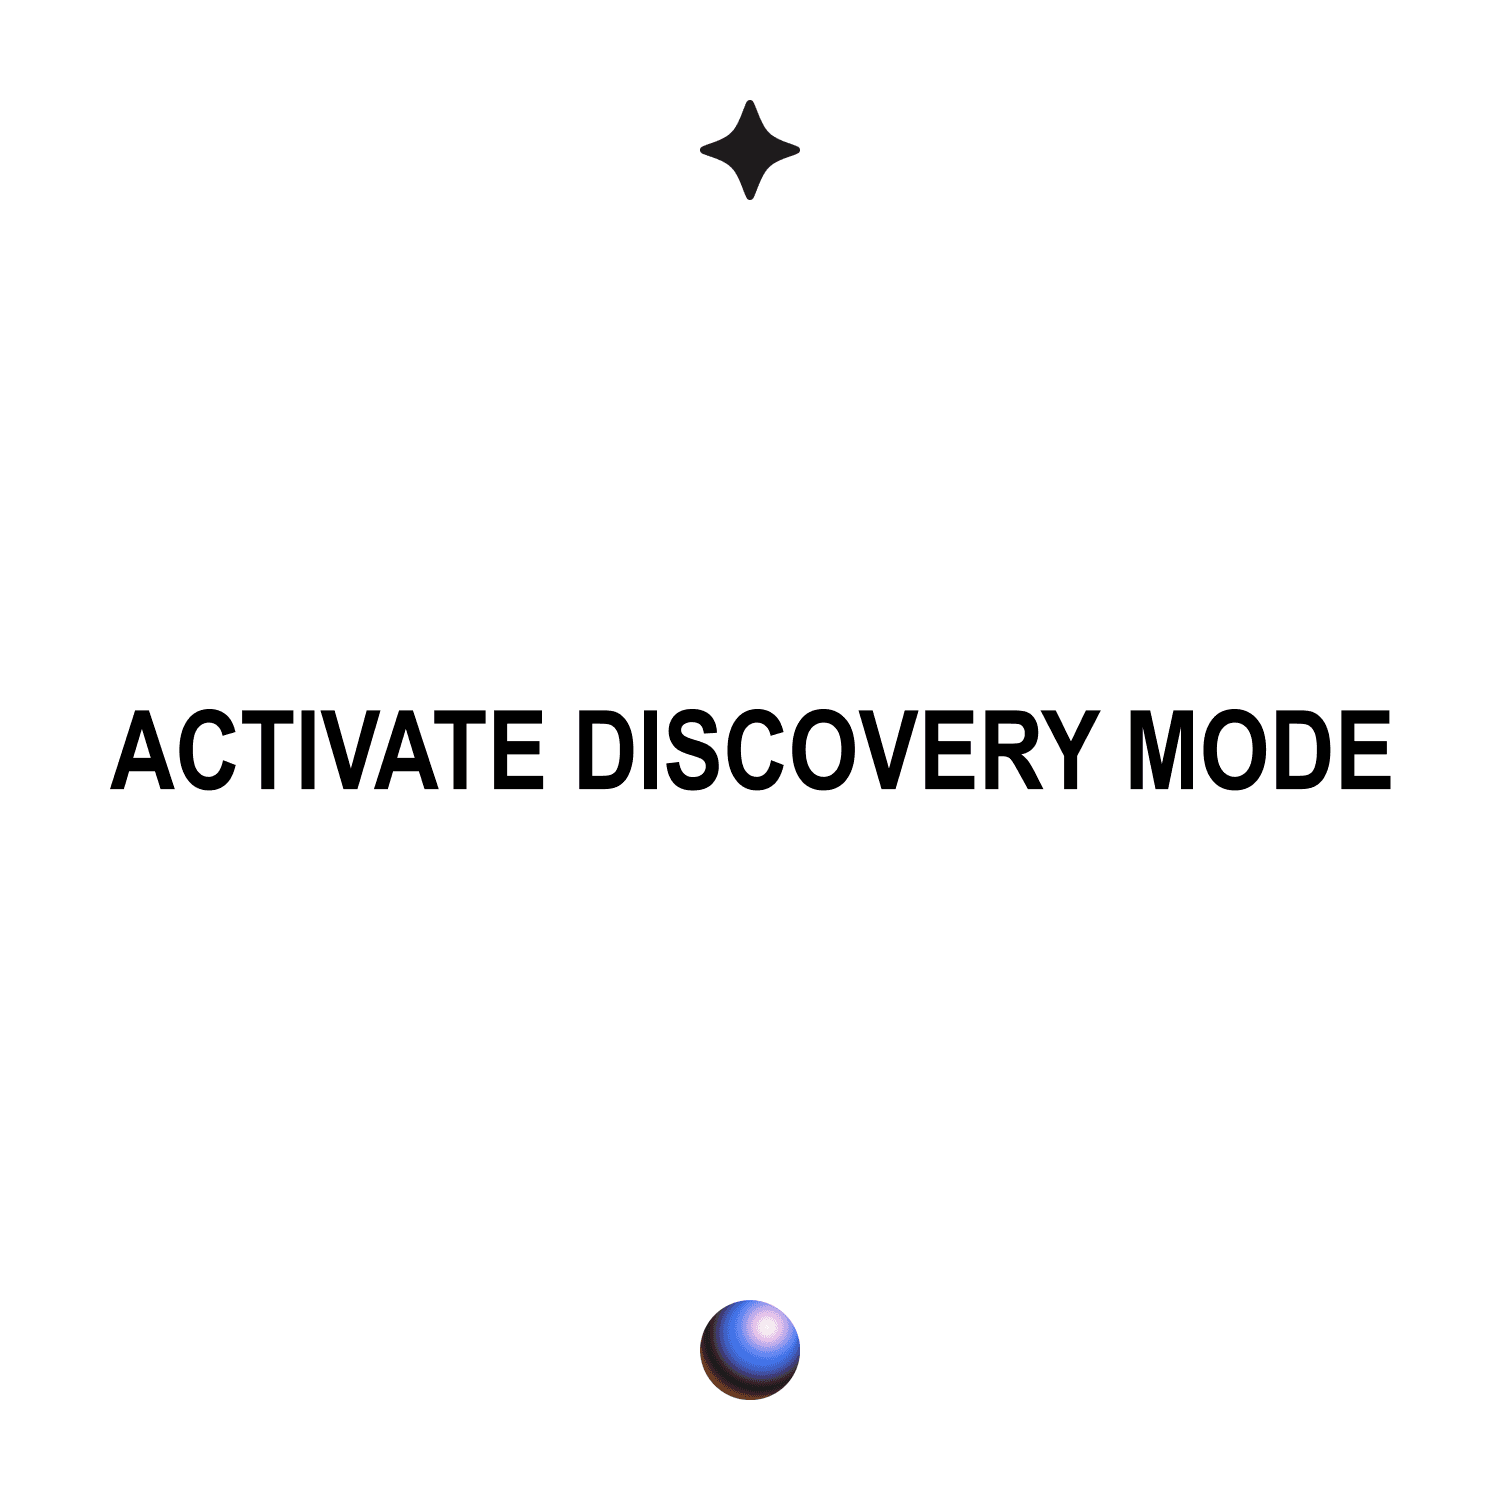 ACTIVATE DISCOVERY MODE